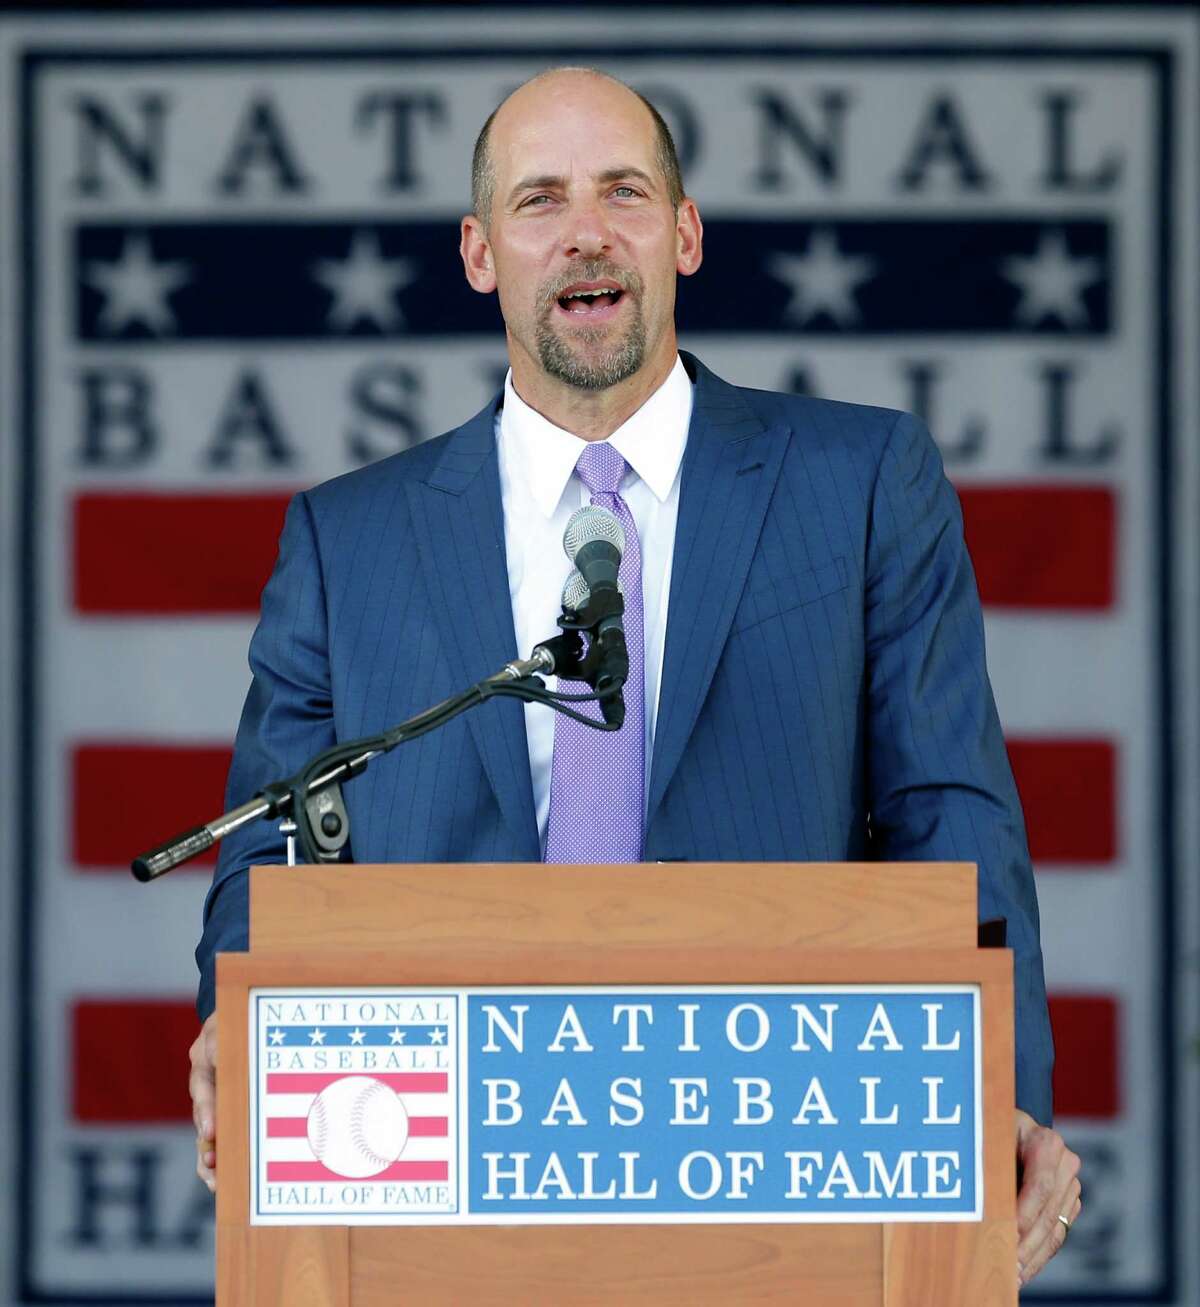 National Baseball Hall of Fame inductee John Smoltz speaks during an induction ceremony at the Clark Sports Center on Sunday, July 26, 2015, in Cooperstown, N.Y. (AP Photo/Mike Groll) ORG XMIT: NYMG113